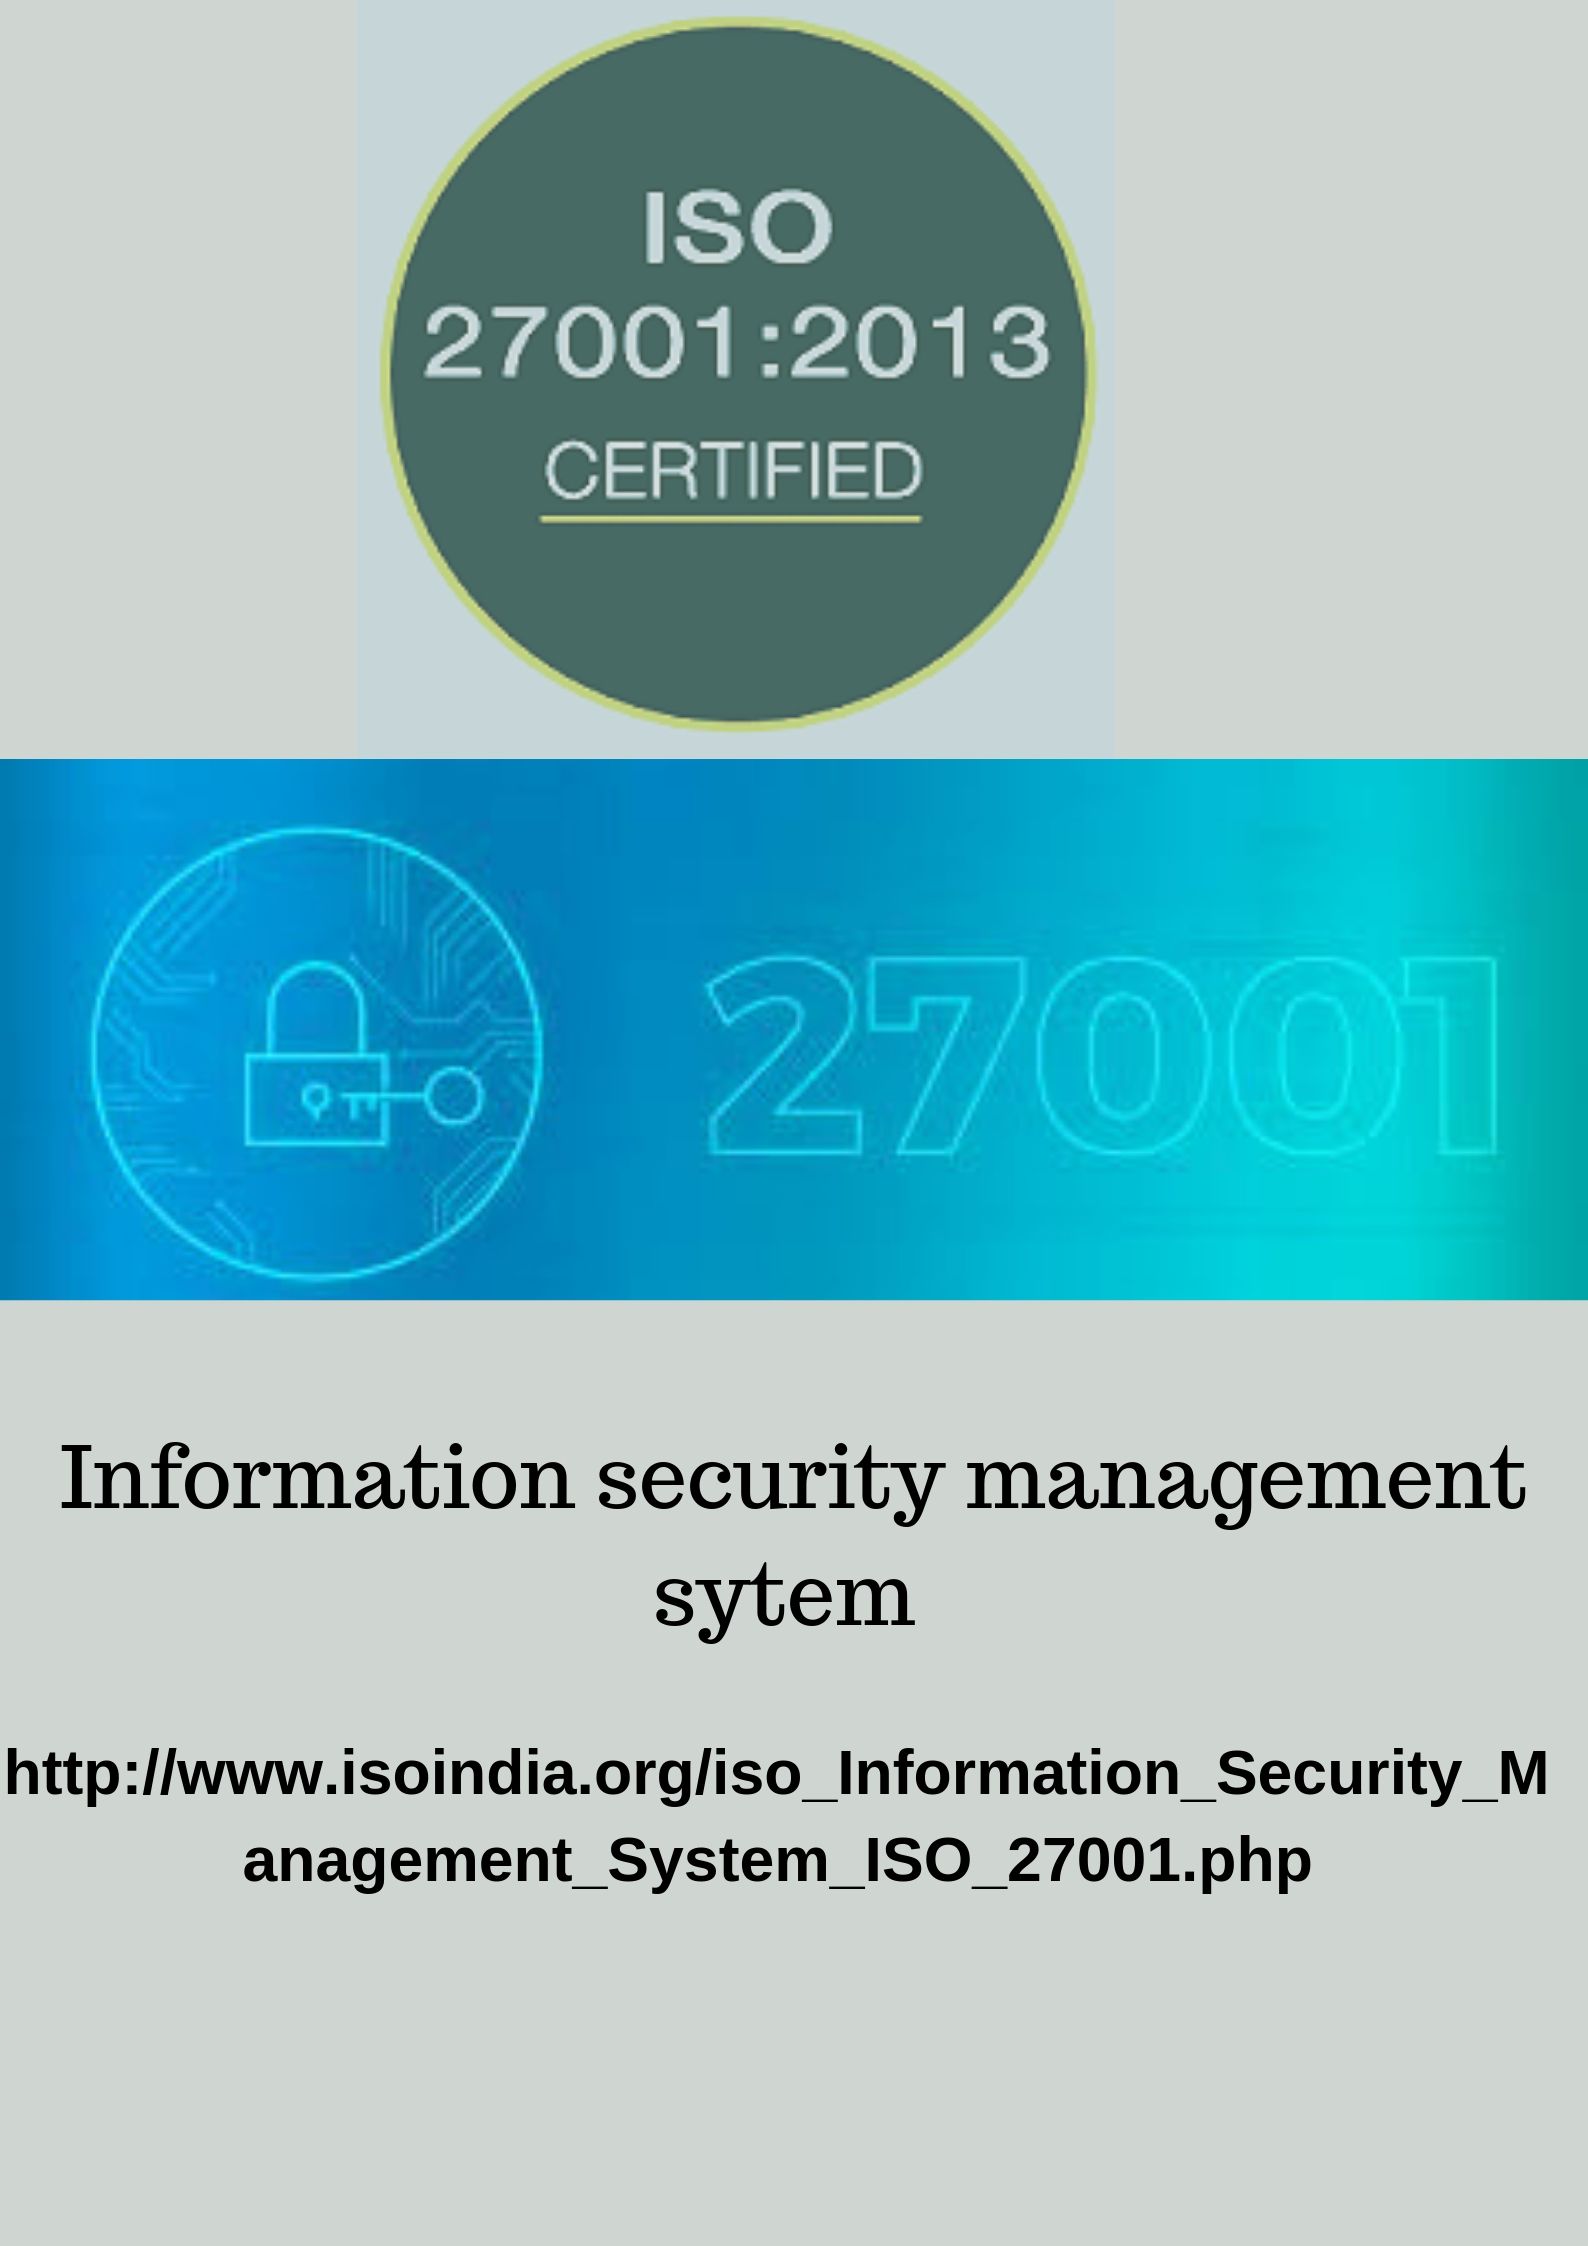 ISO 27001 information security management system (ISMS)